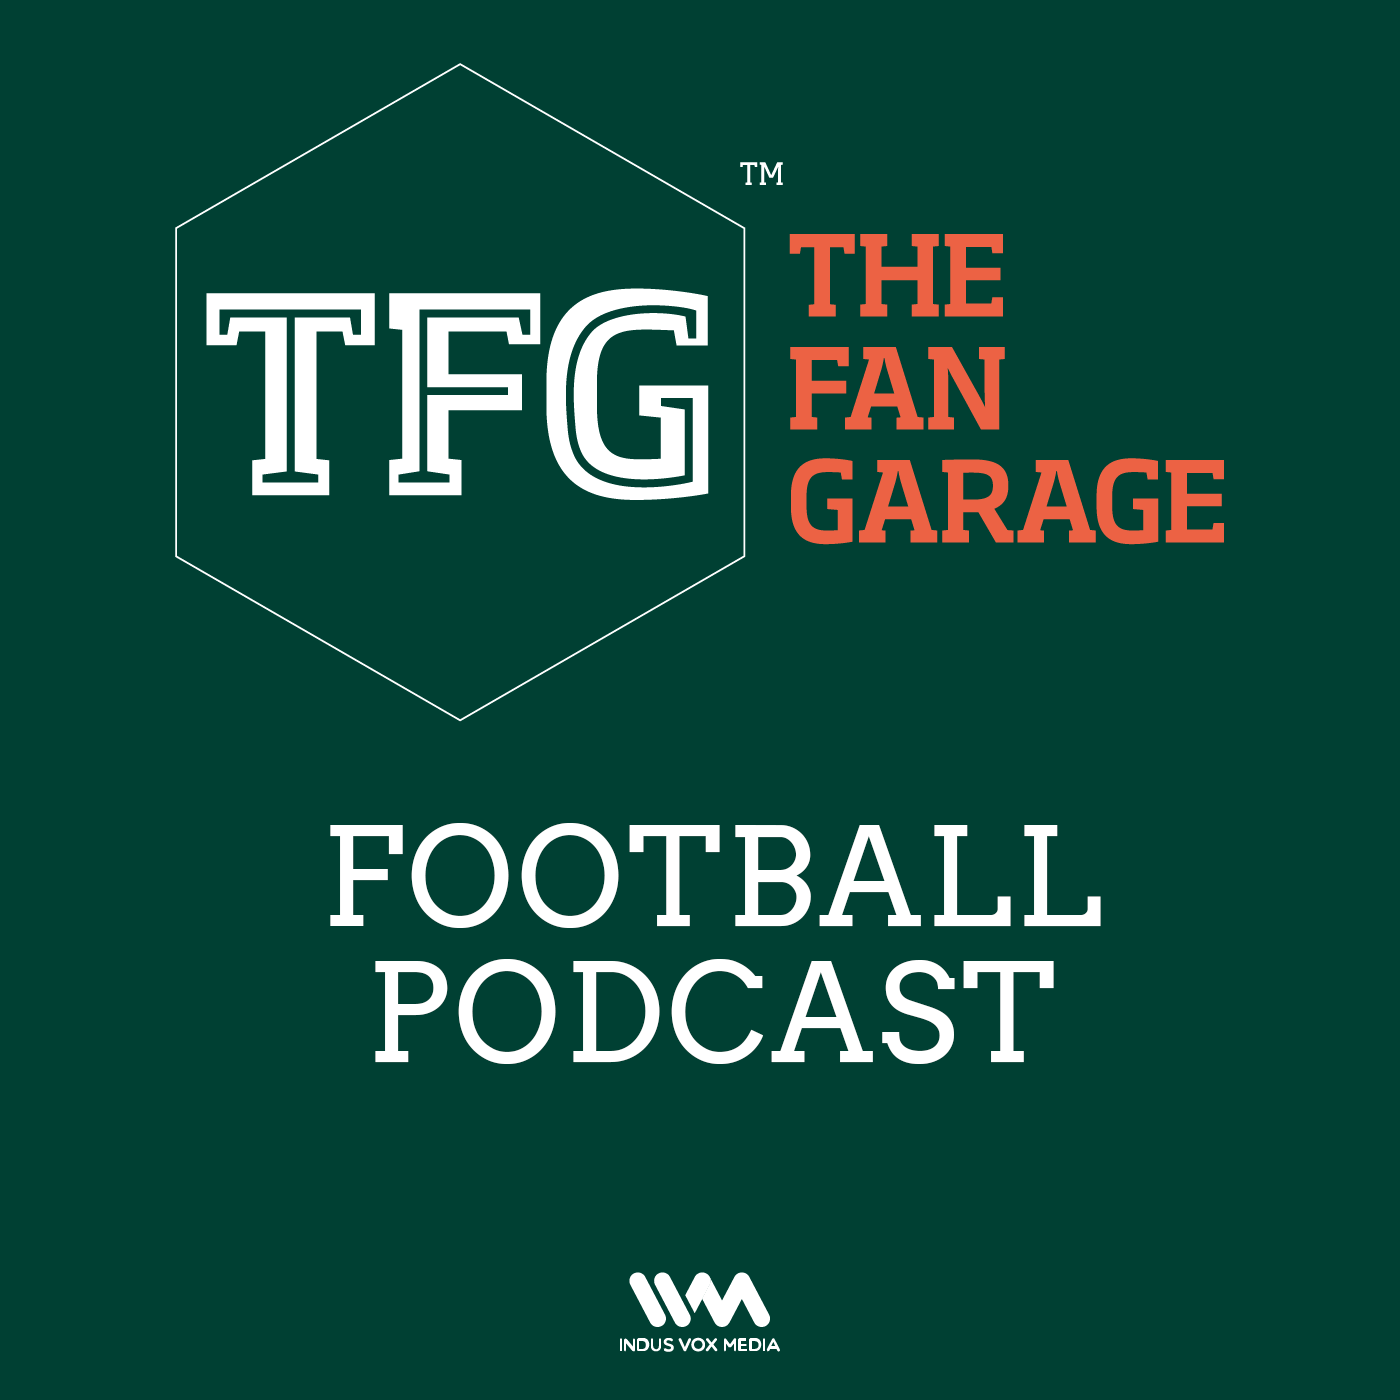 TFG Indian Football Ep 252: I-League: Cafe Koffi Day